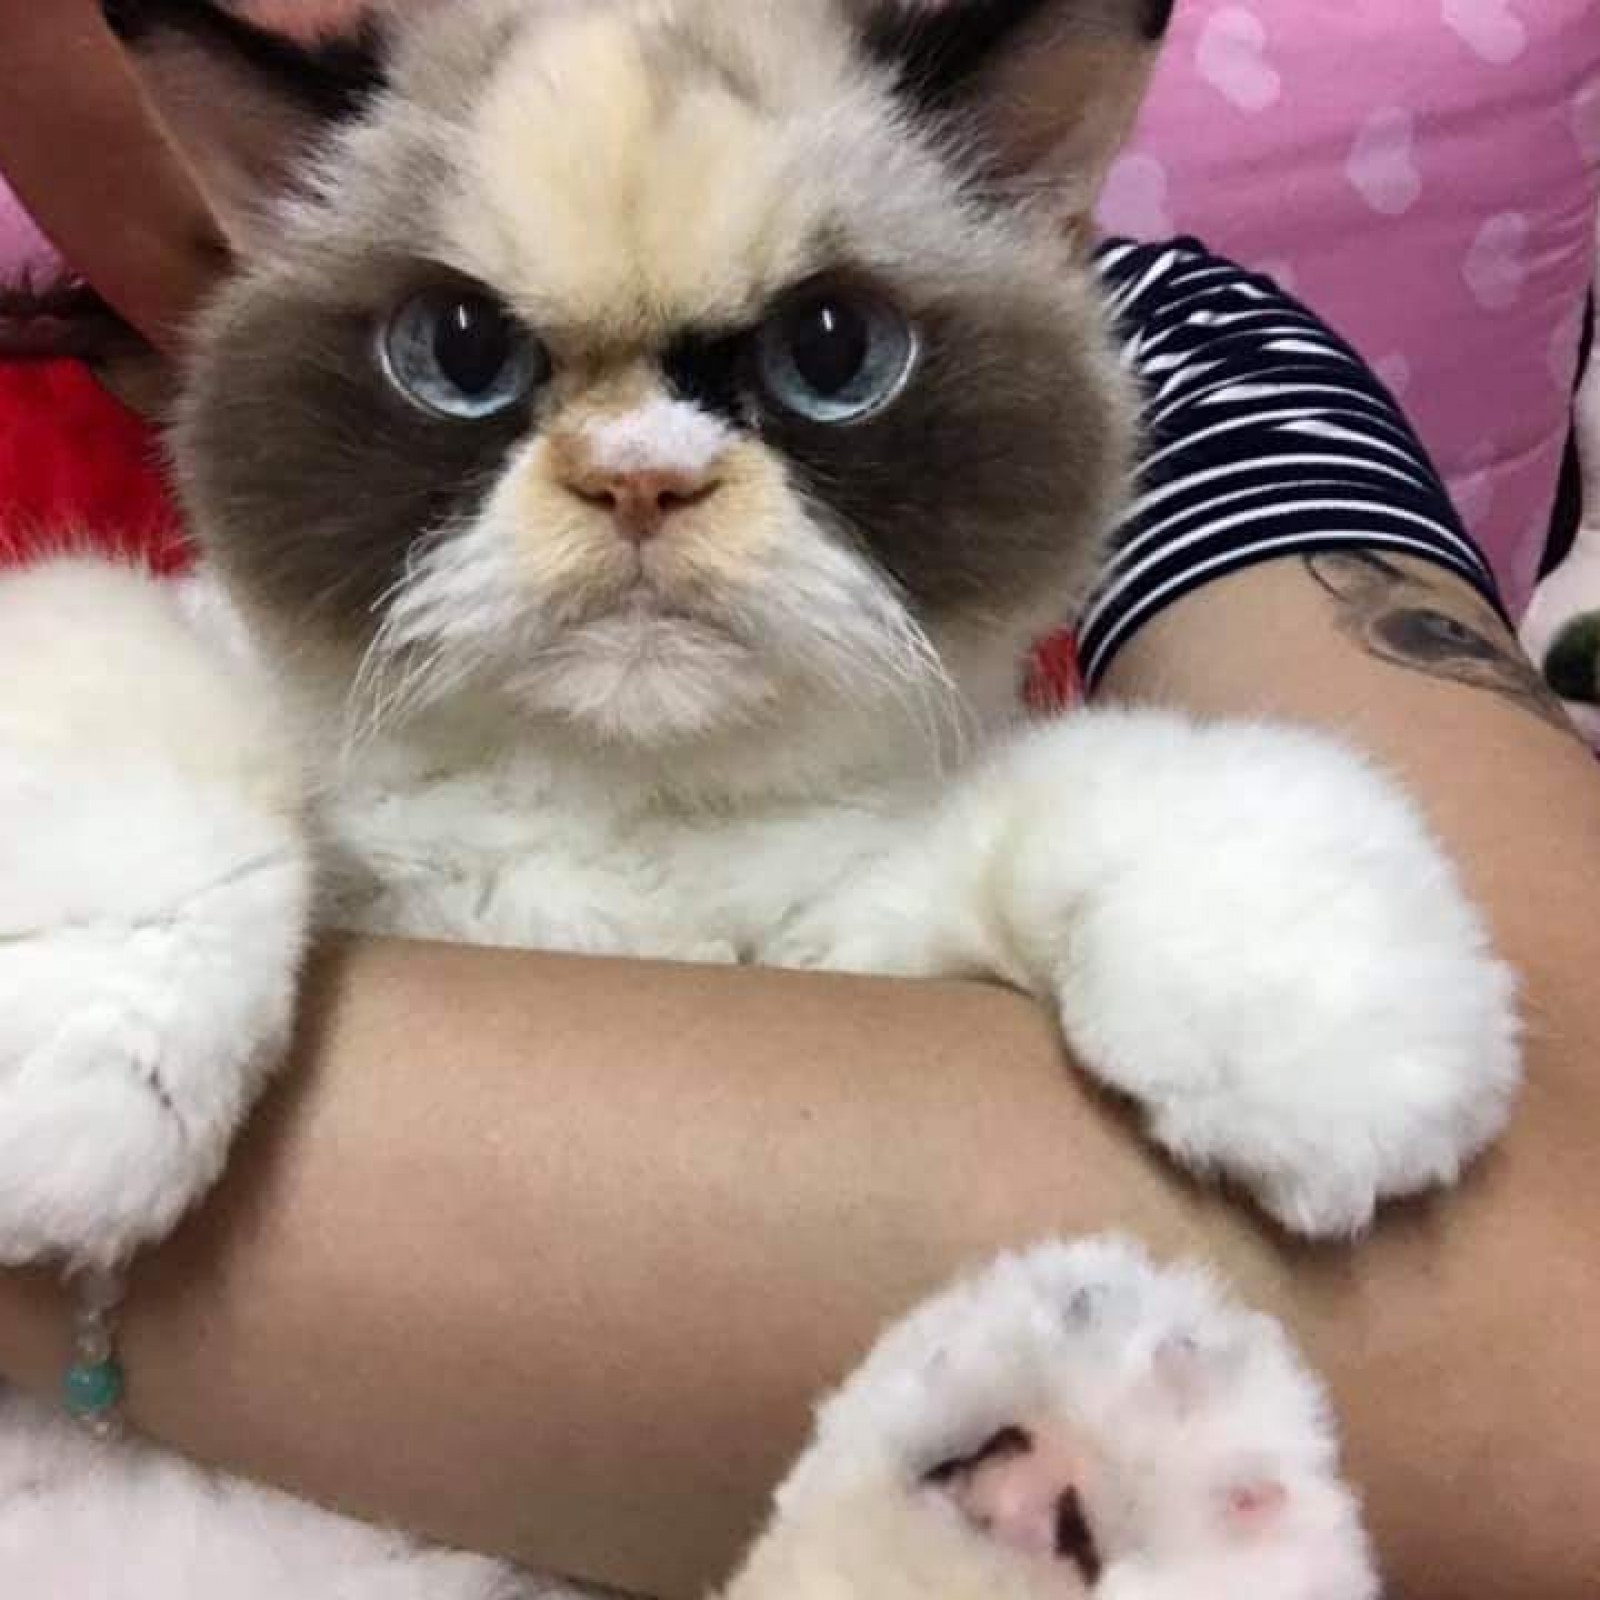 Is This The New Grumpy Cat